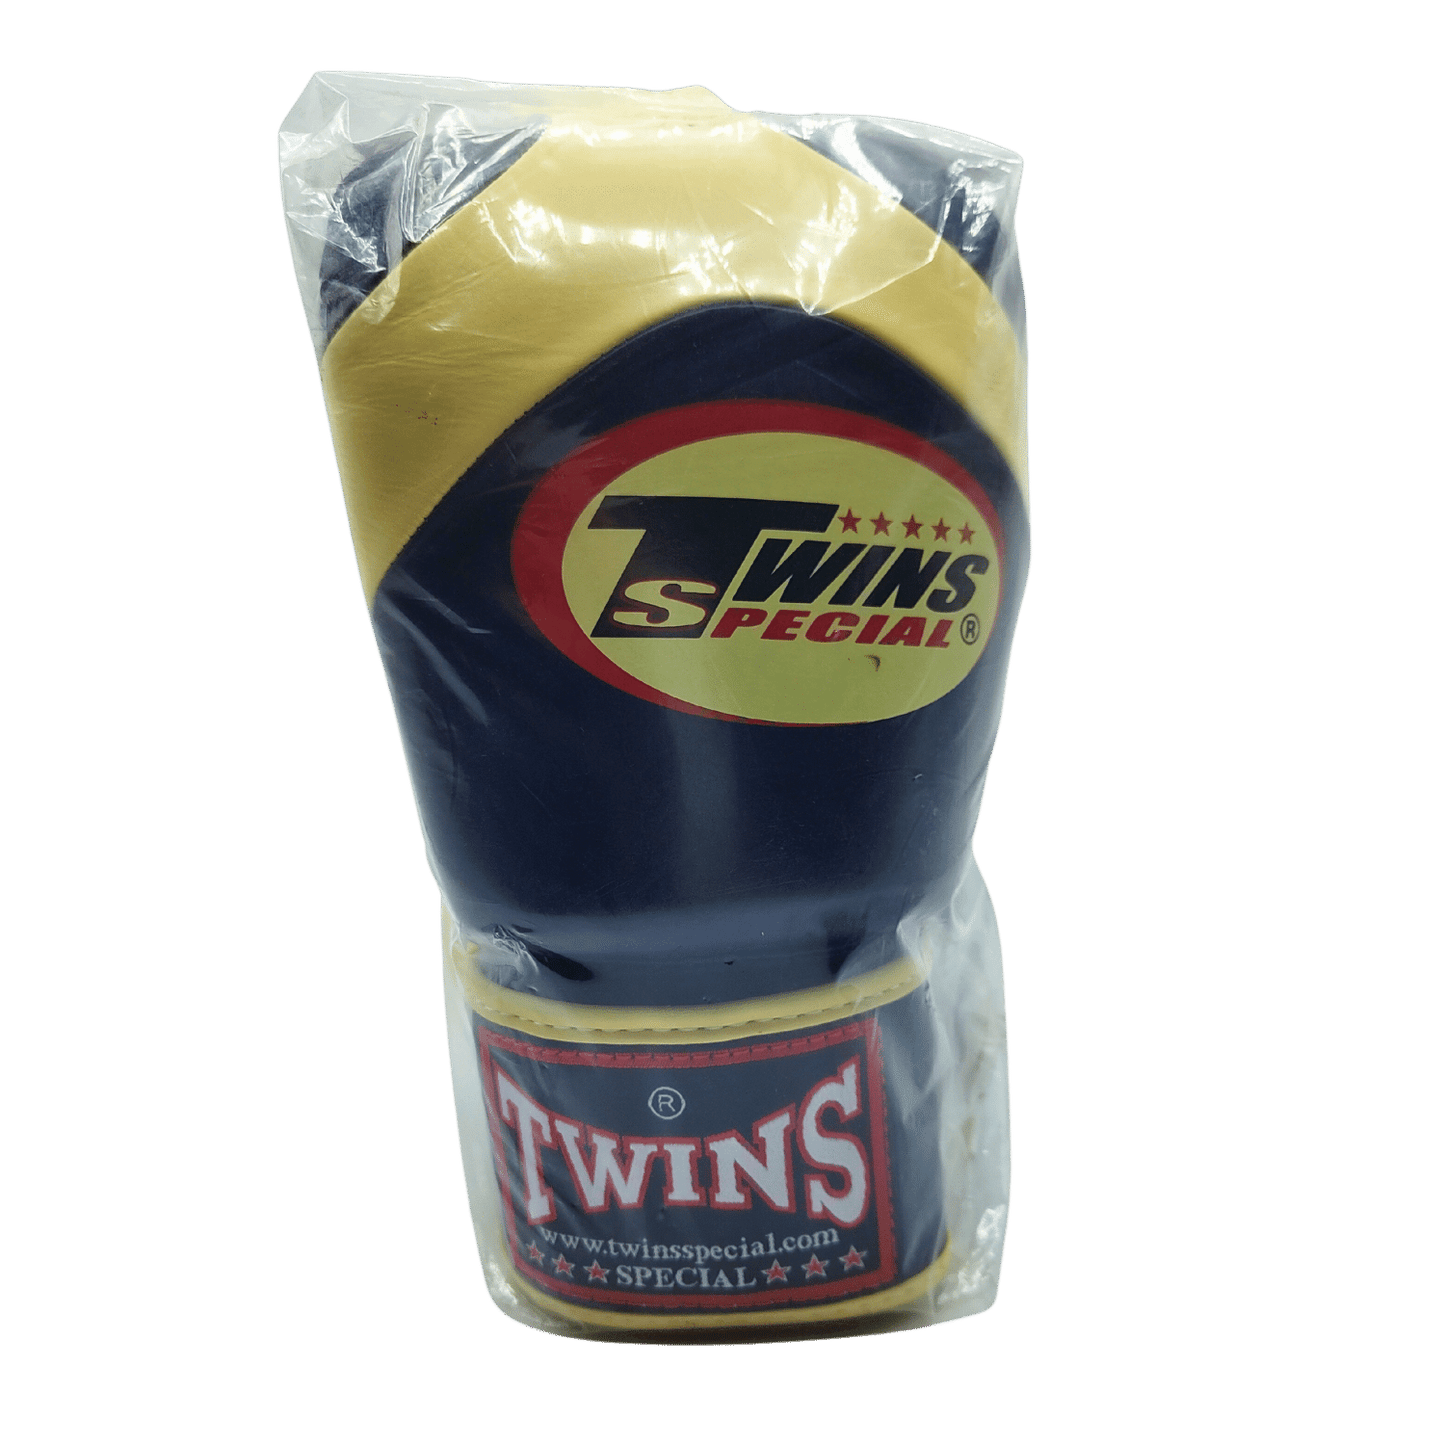 Twins Duo Colour 8oz Boxing Gloves - Cream & Navy gloves in a package, perfect for Muay Thai.